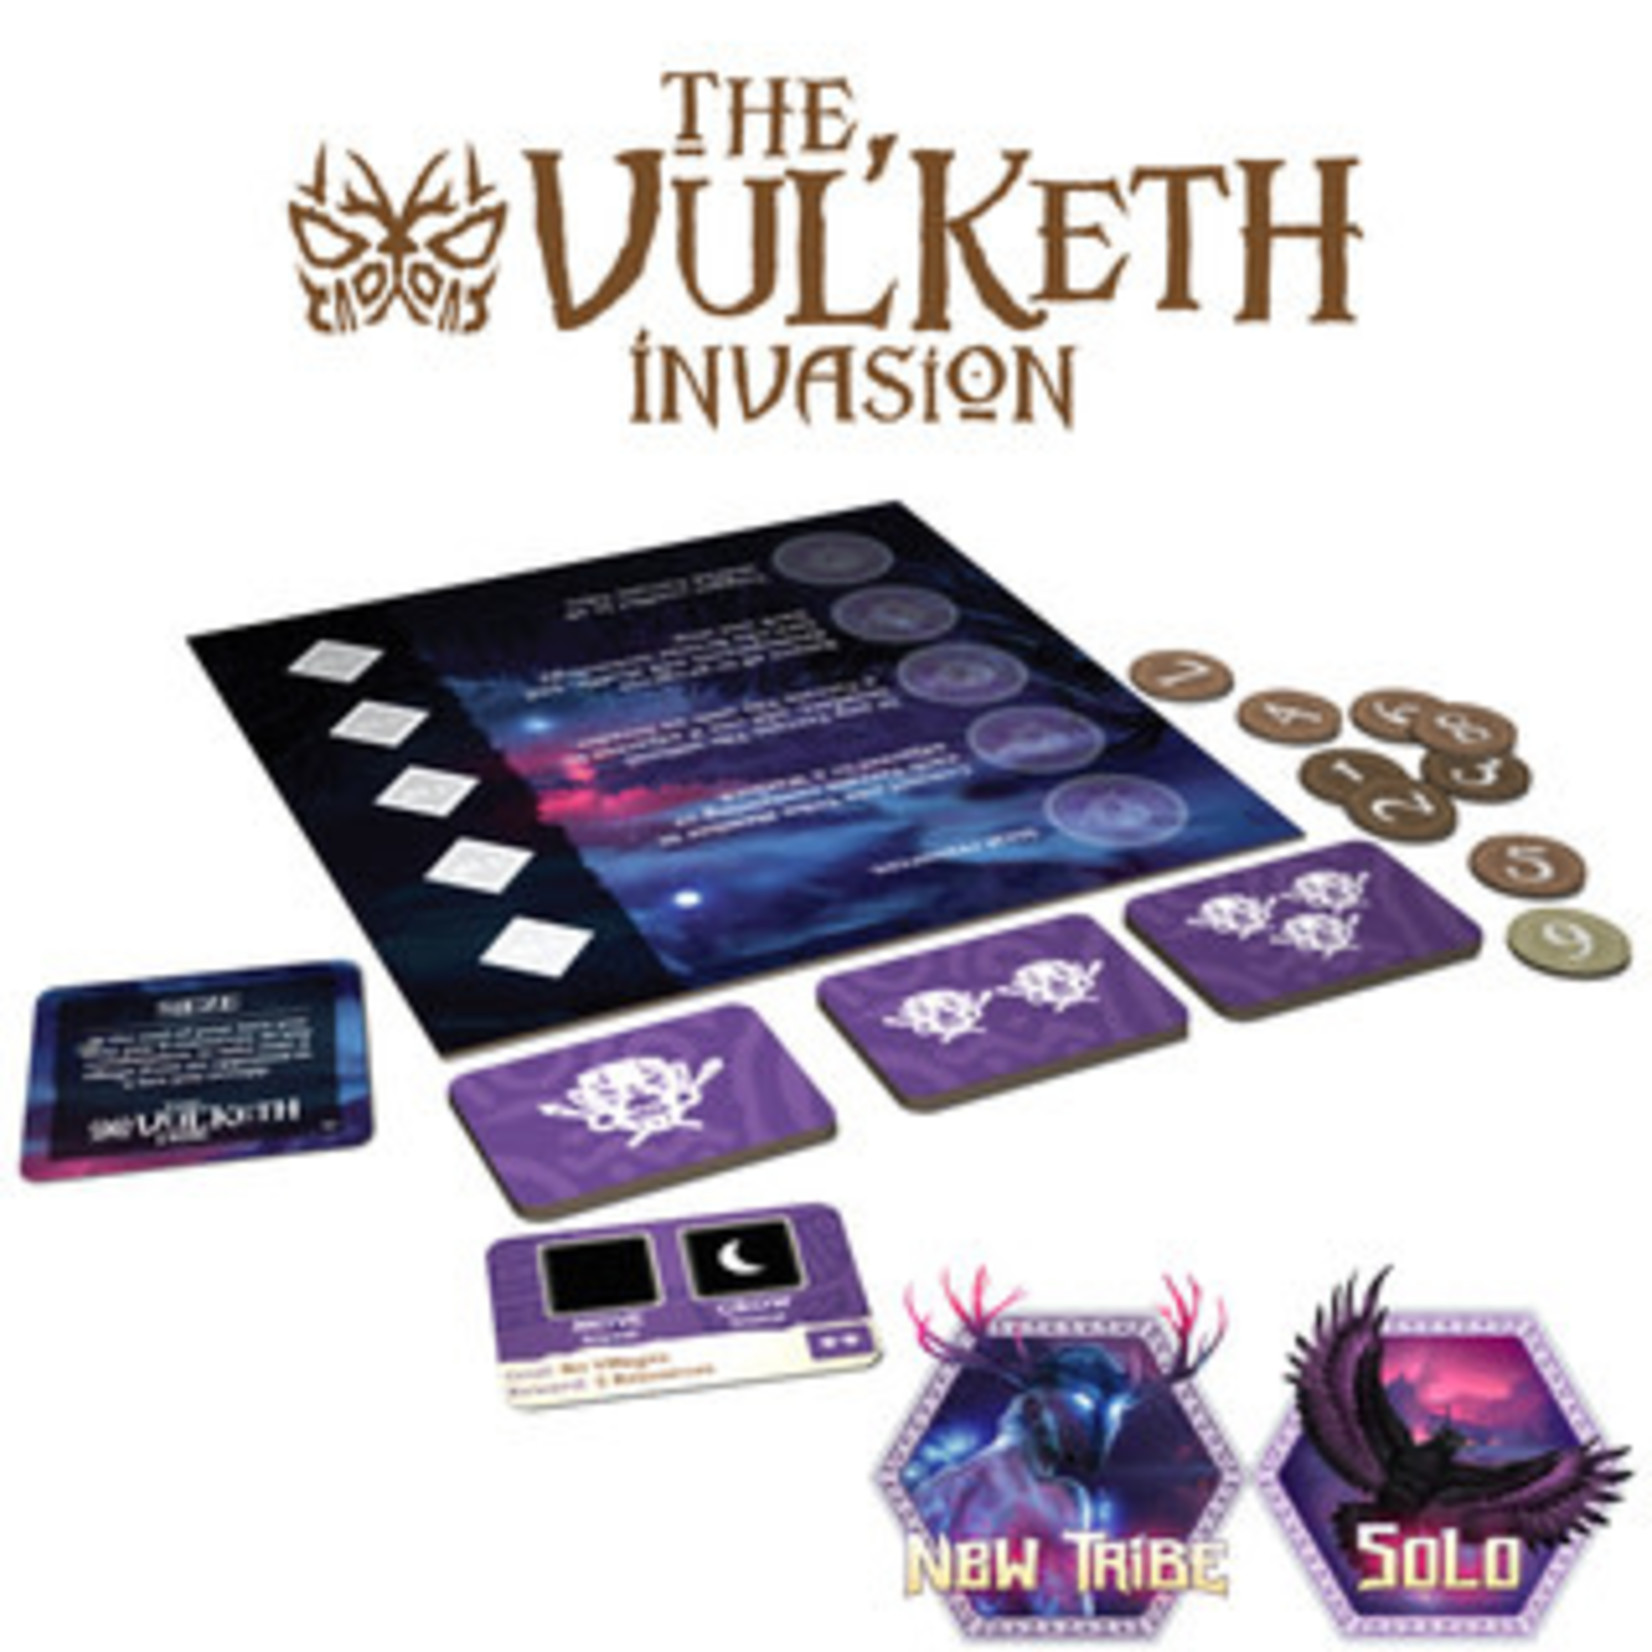 Breaking Games Rise of Tribes Vul'Keth Invasion KS